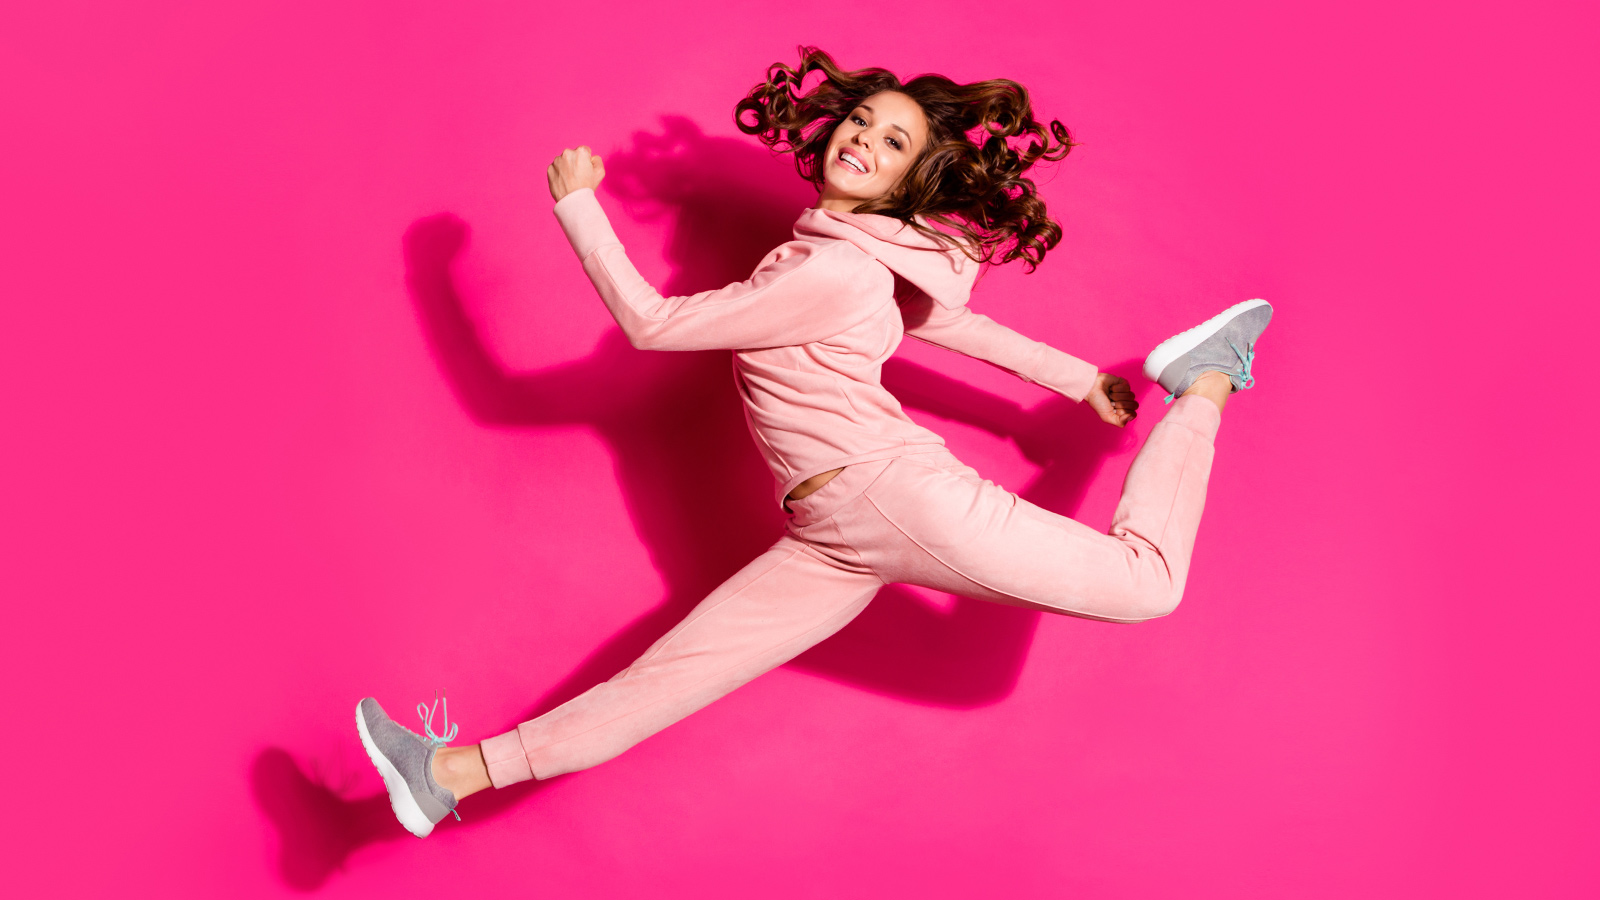 Full length body size photo jumping flight high smiling amazing she her lady hands arms help rushing shopping wearing modern casual pink costume suit pullover outfit isolated vibrant rose background